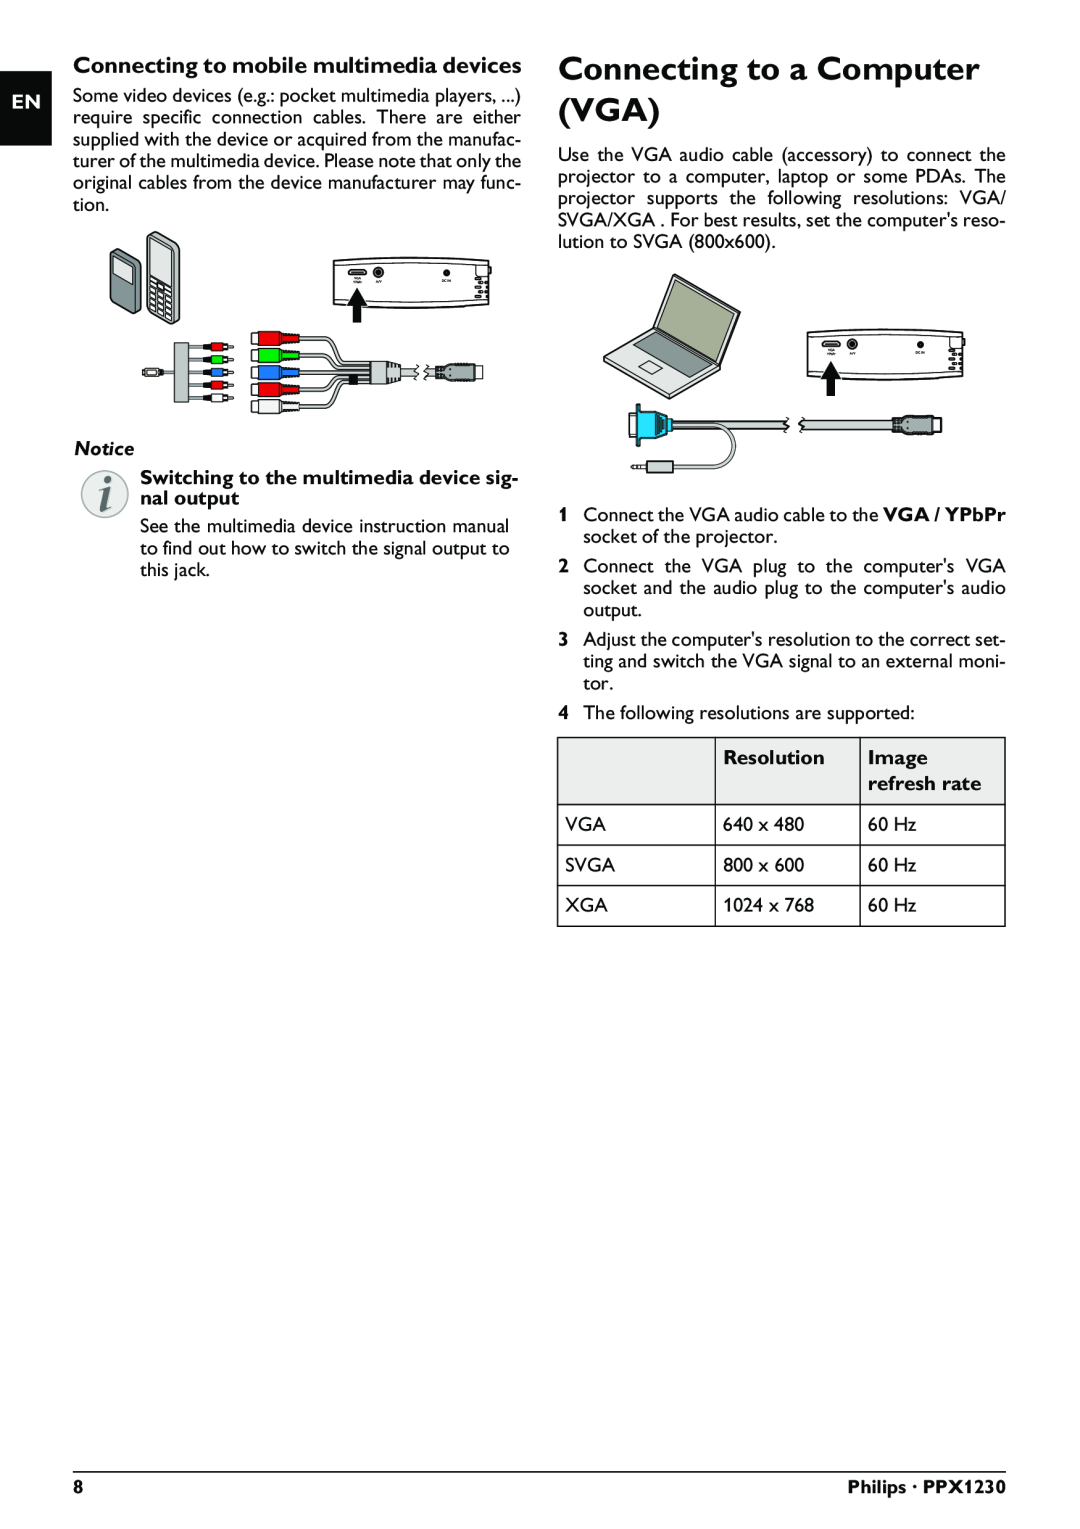 Philips PPX1230 user manual Connecting to a Computer VGA, Resolution, Image, refresh rate 